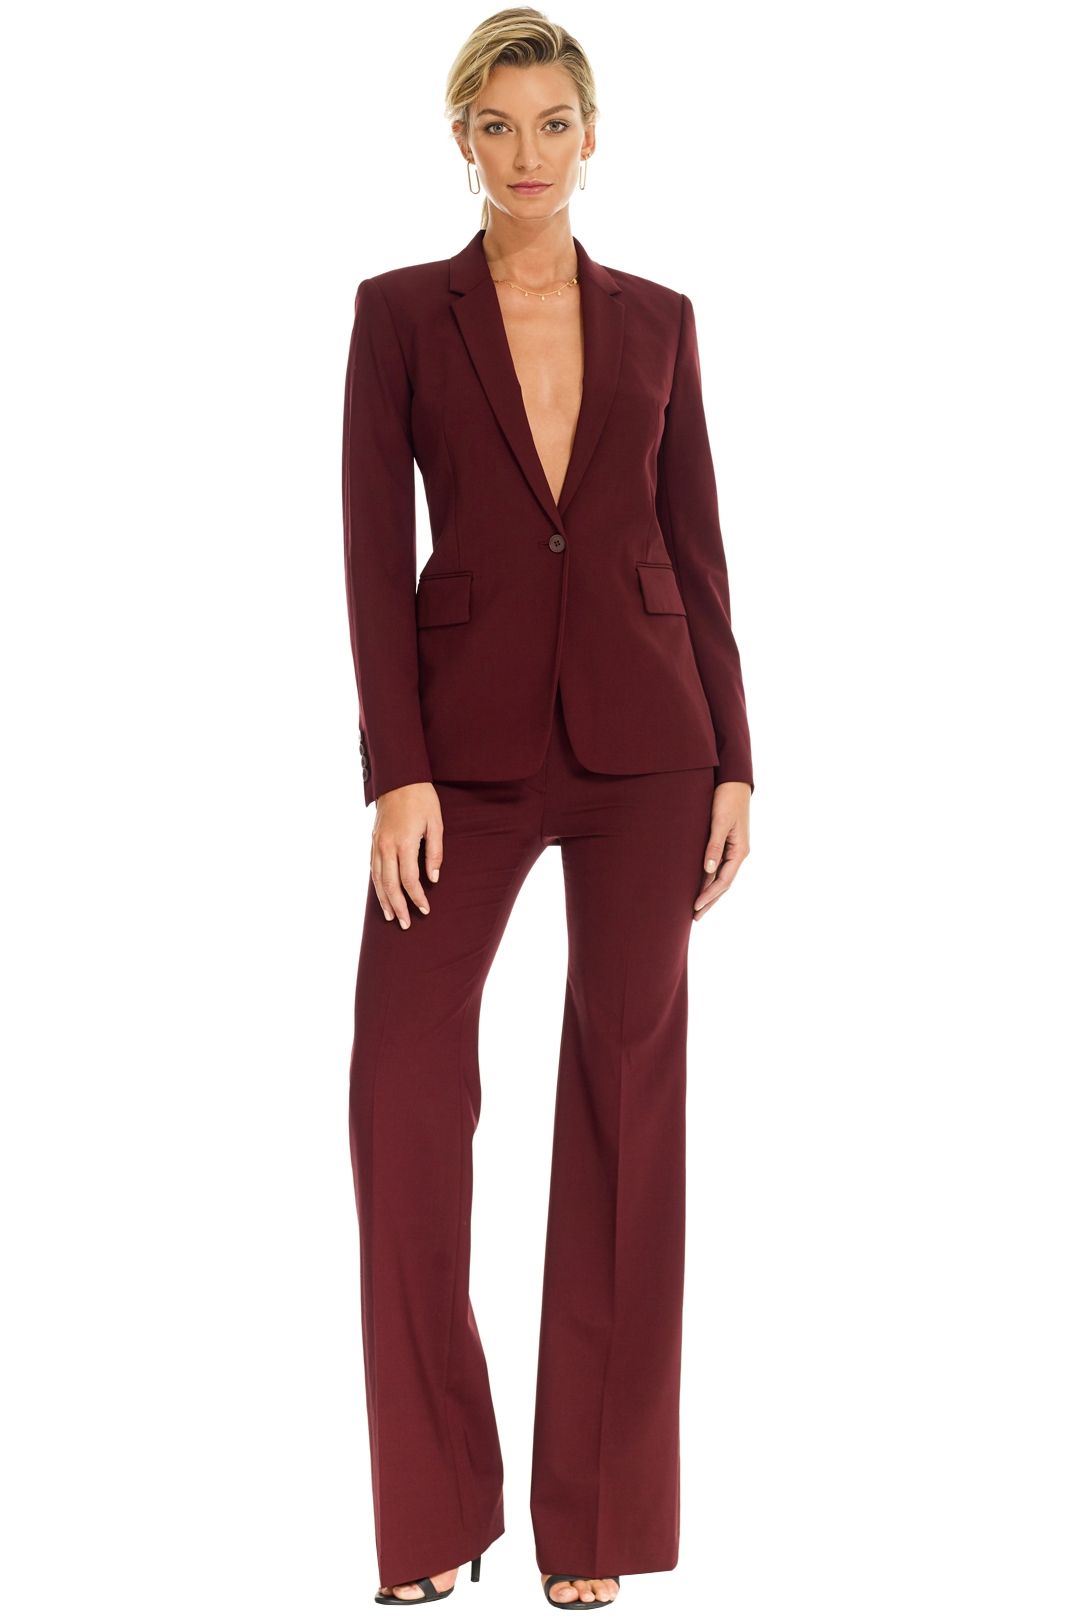 Theory - Crepe Jacket and Pant - Burgundy - Front